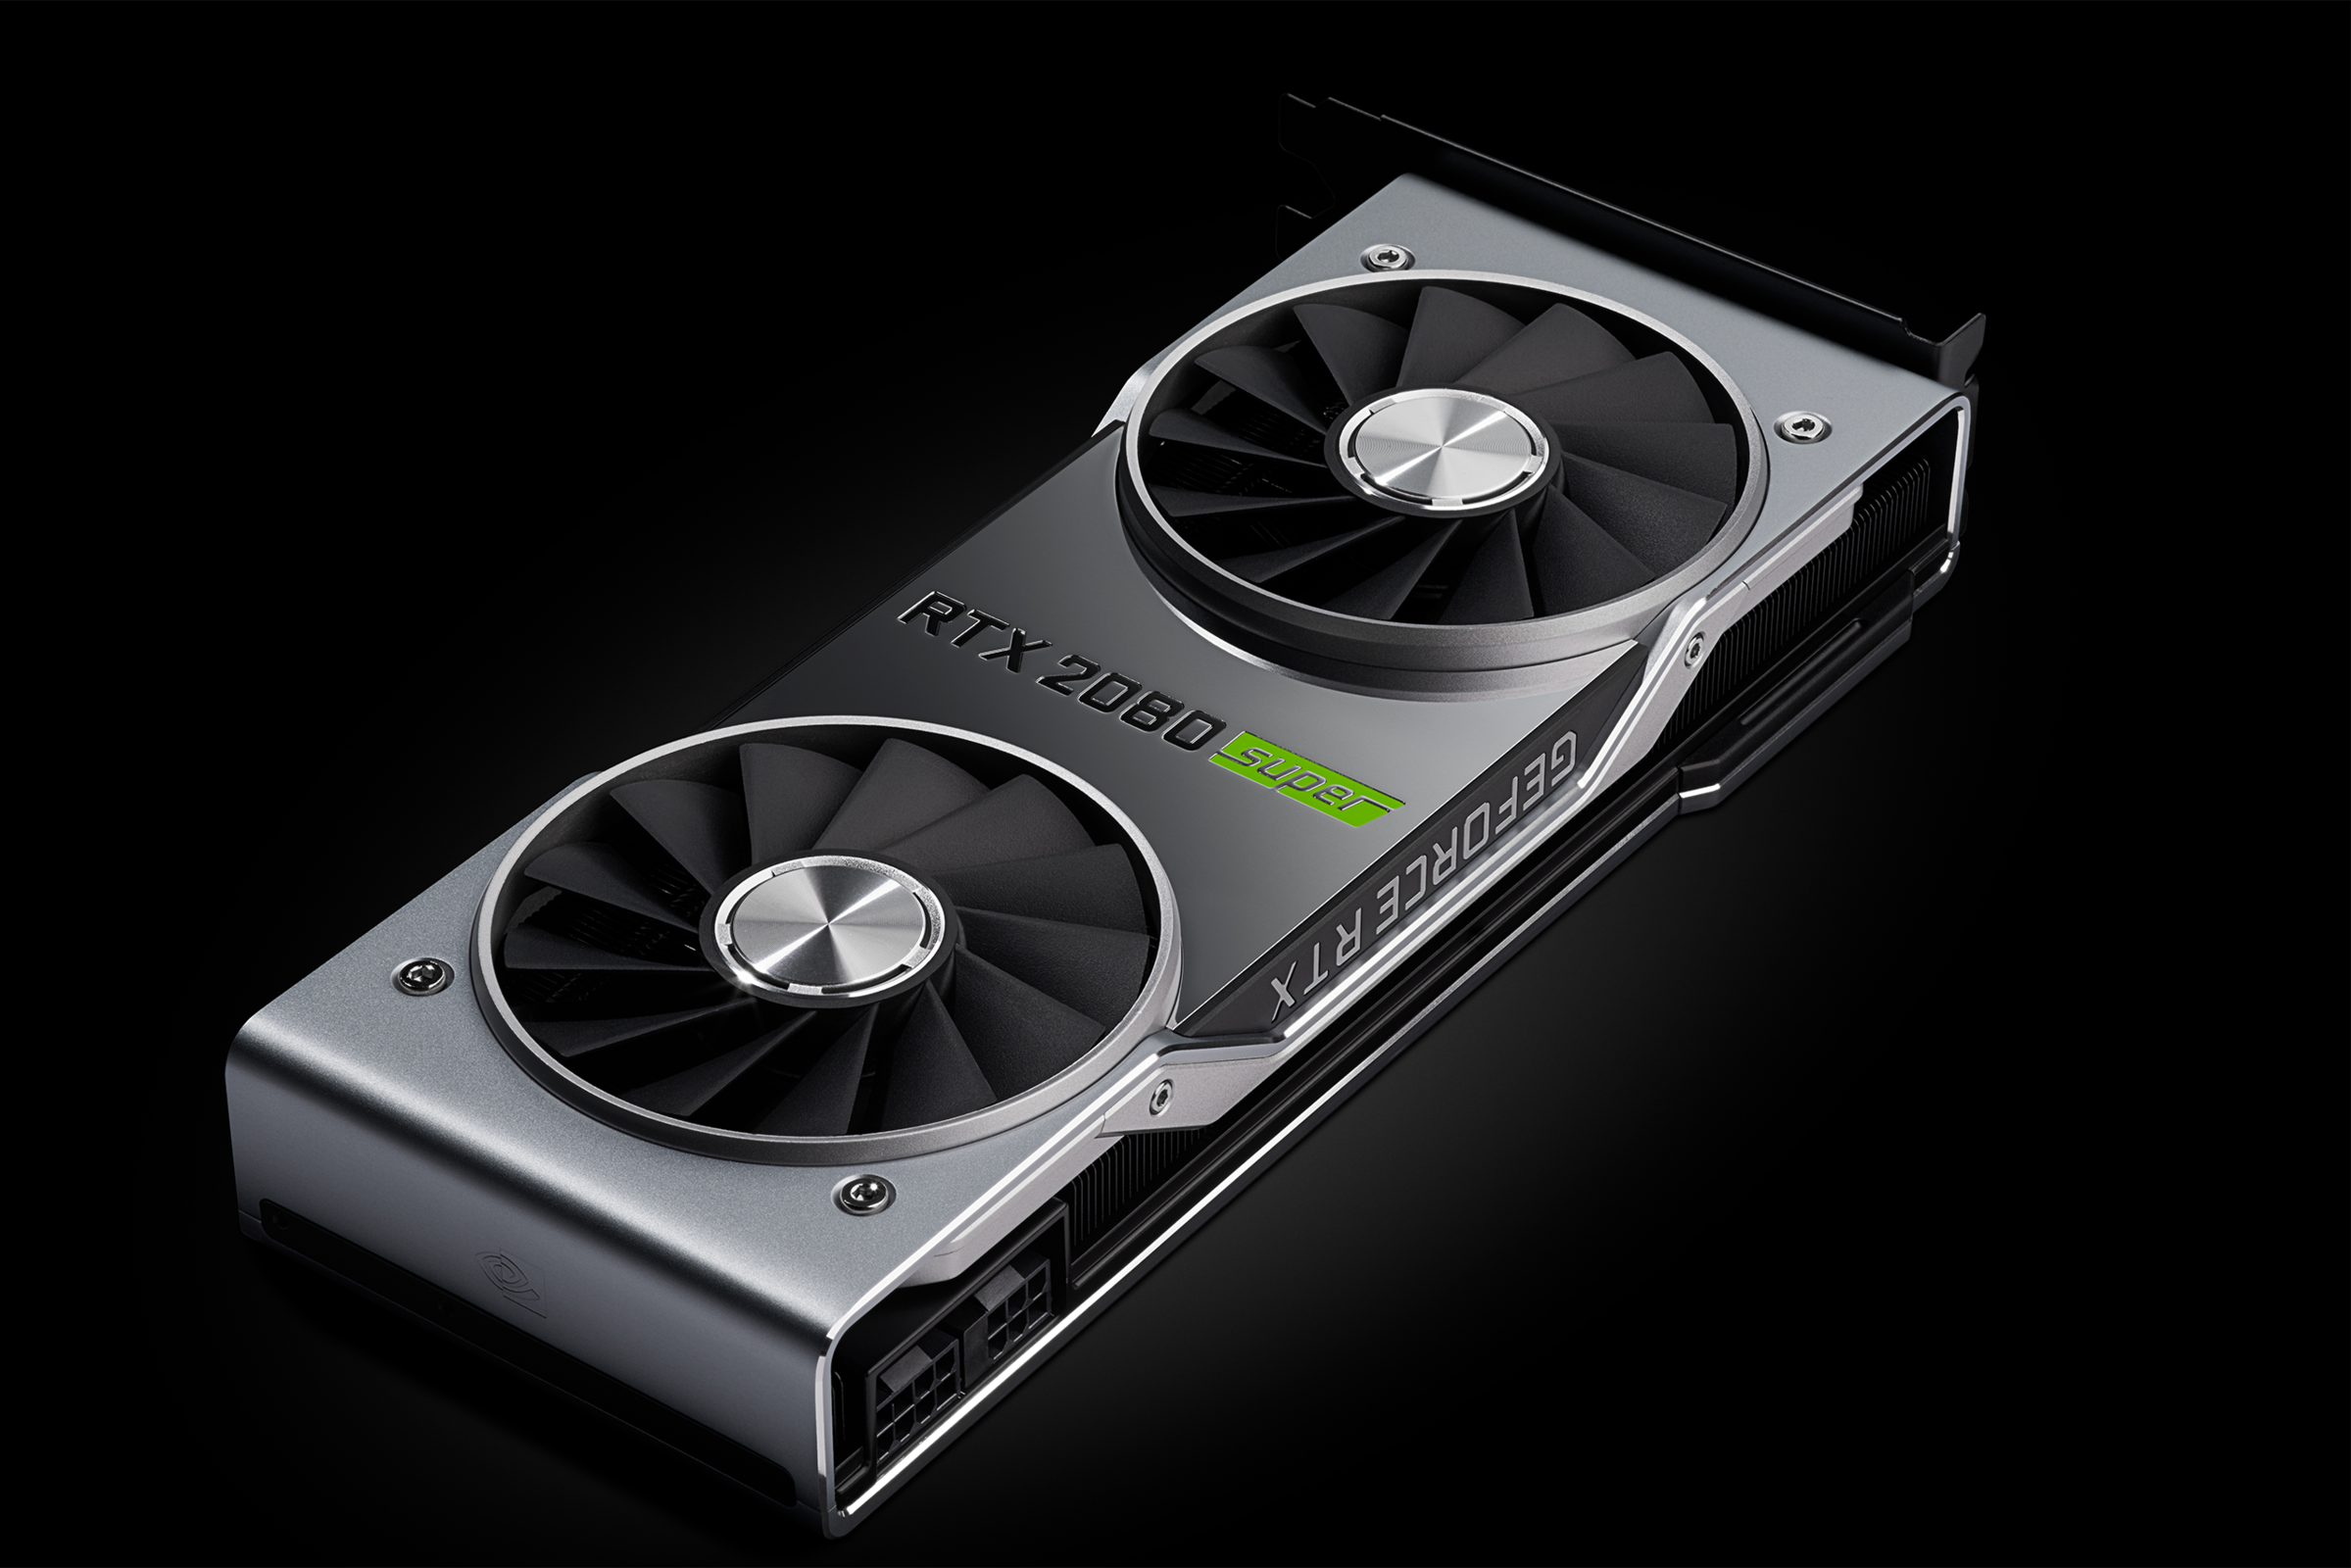 Glimte skør Nautisk Release of an Nvidia GeForce RTX 2080 Ti SUPER graphics card could depend  on AMD - NotebookCheck.net News